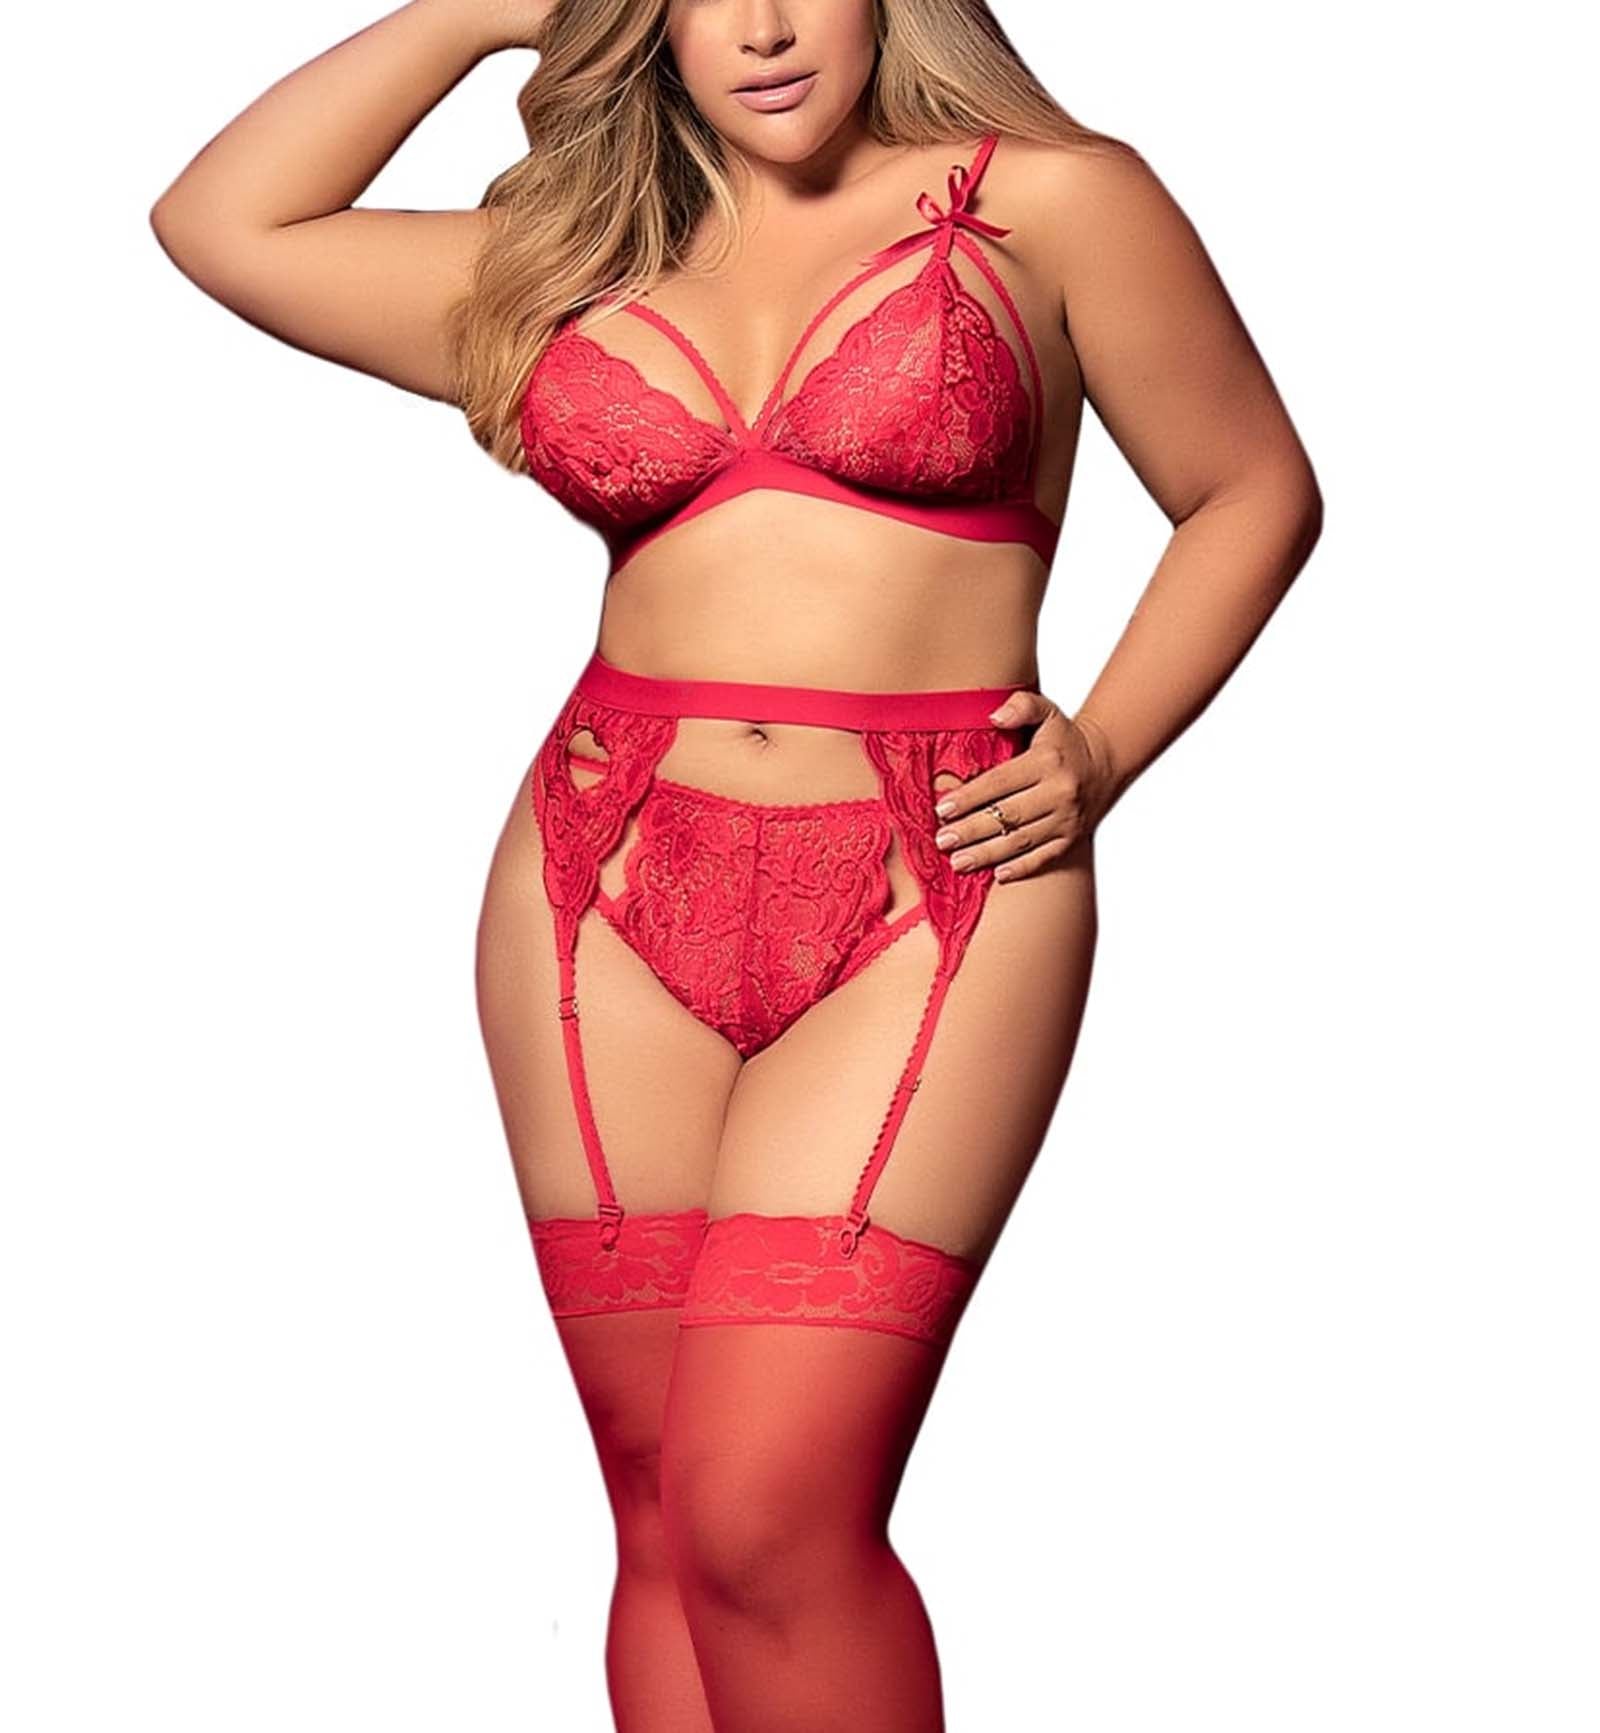 Mapale Lace Hearts 3 Piece Set: Triangle Bra, Garter Belt, Thong PLUS size (8221X),1X/2X,Red - Red,1X/2X